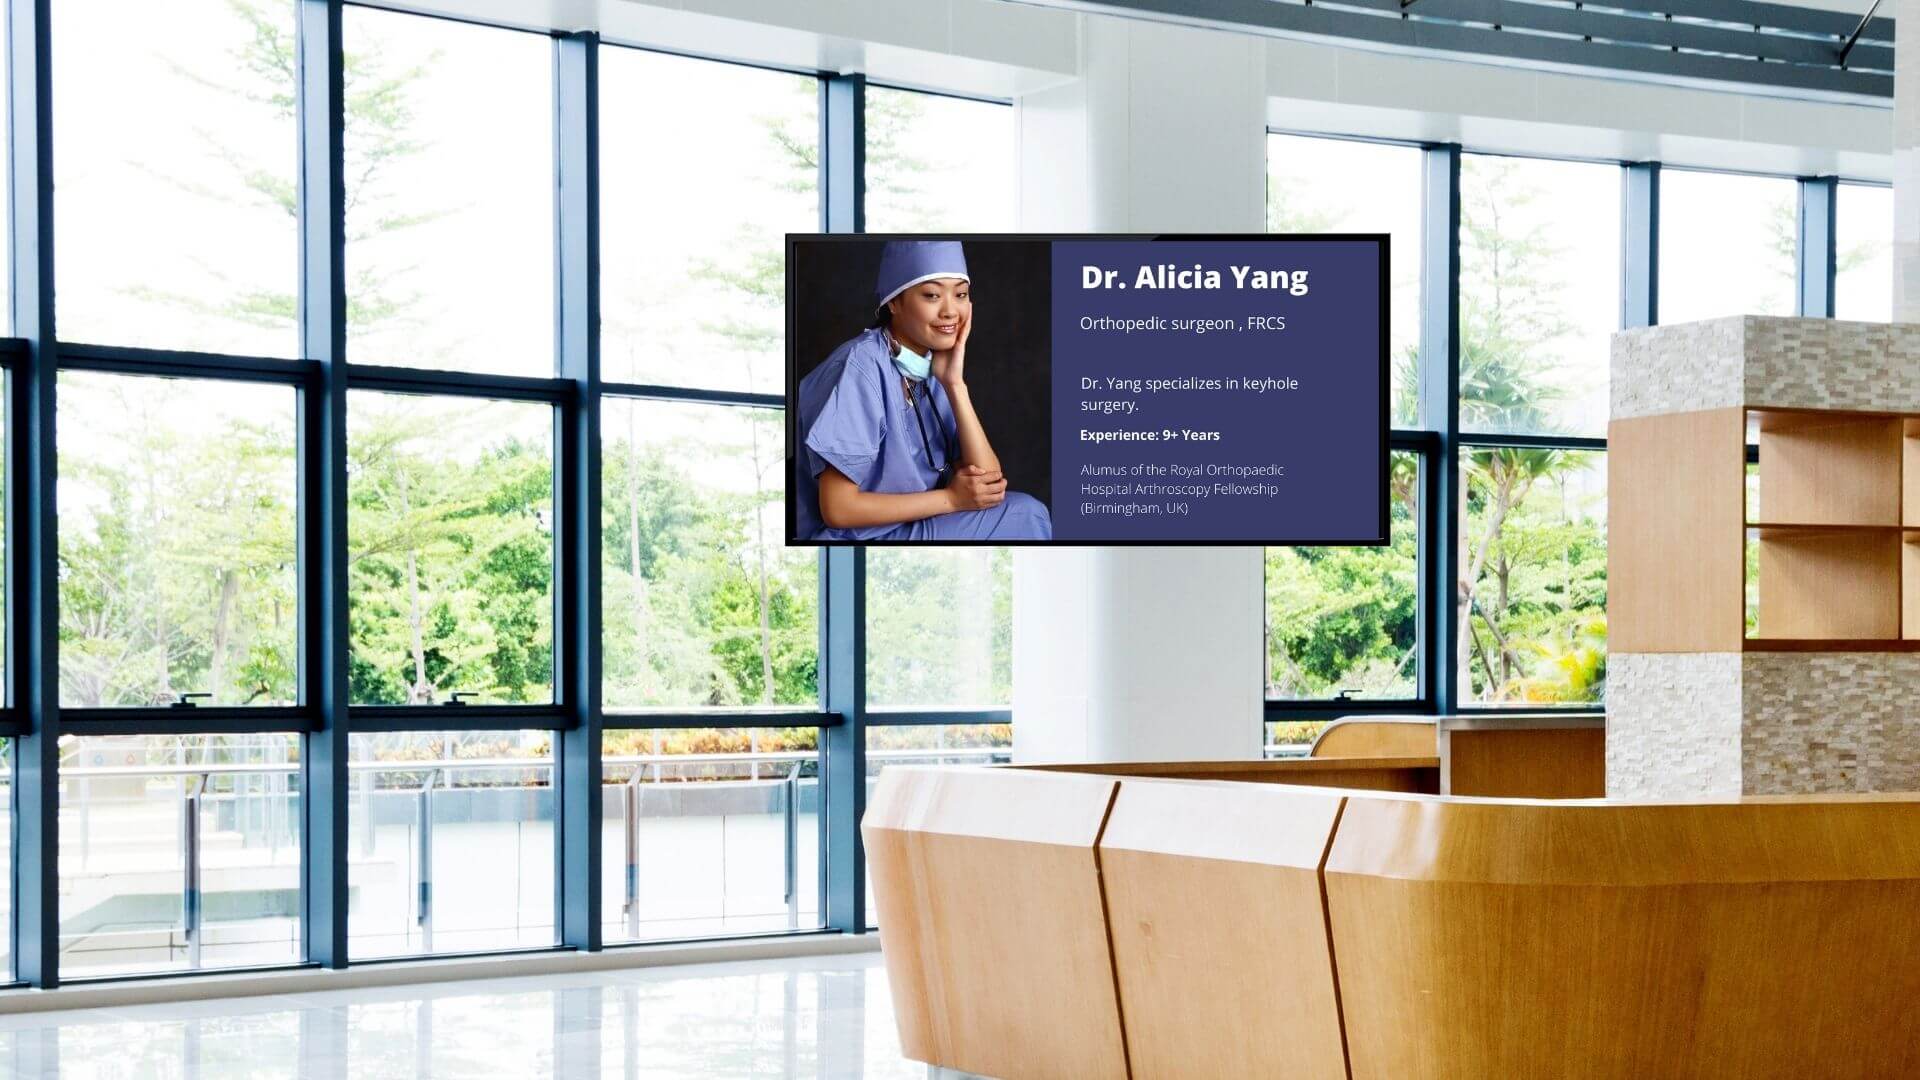 A hospital reception shows a doctor’s profile on digital signage